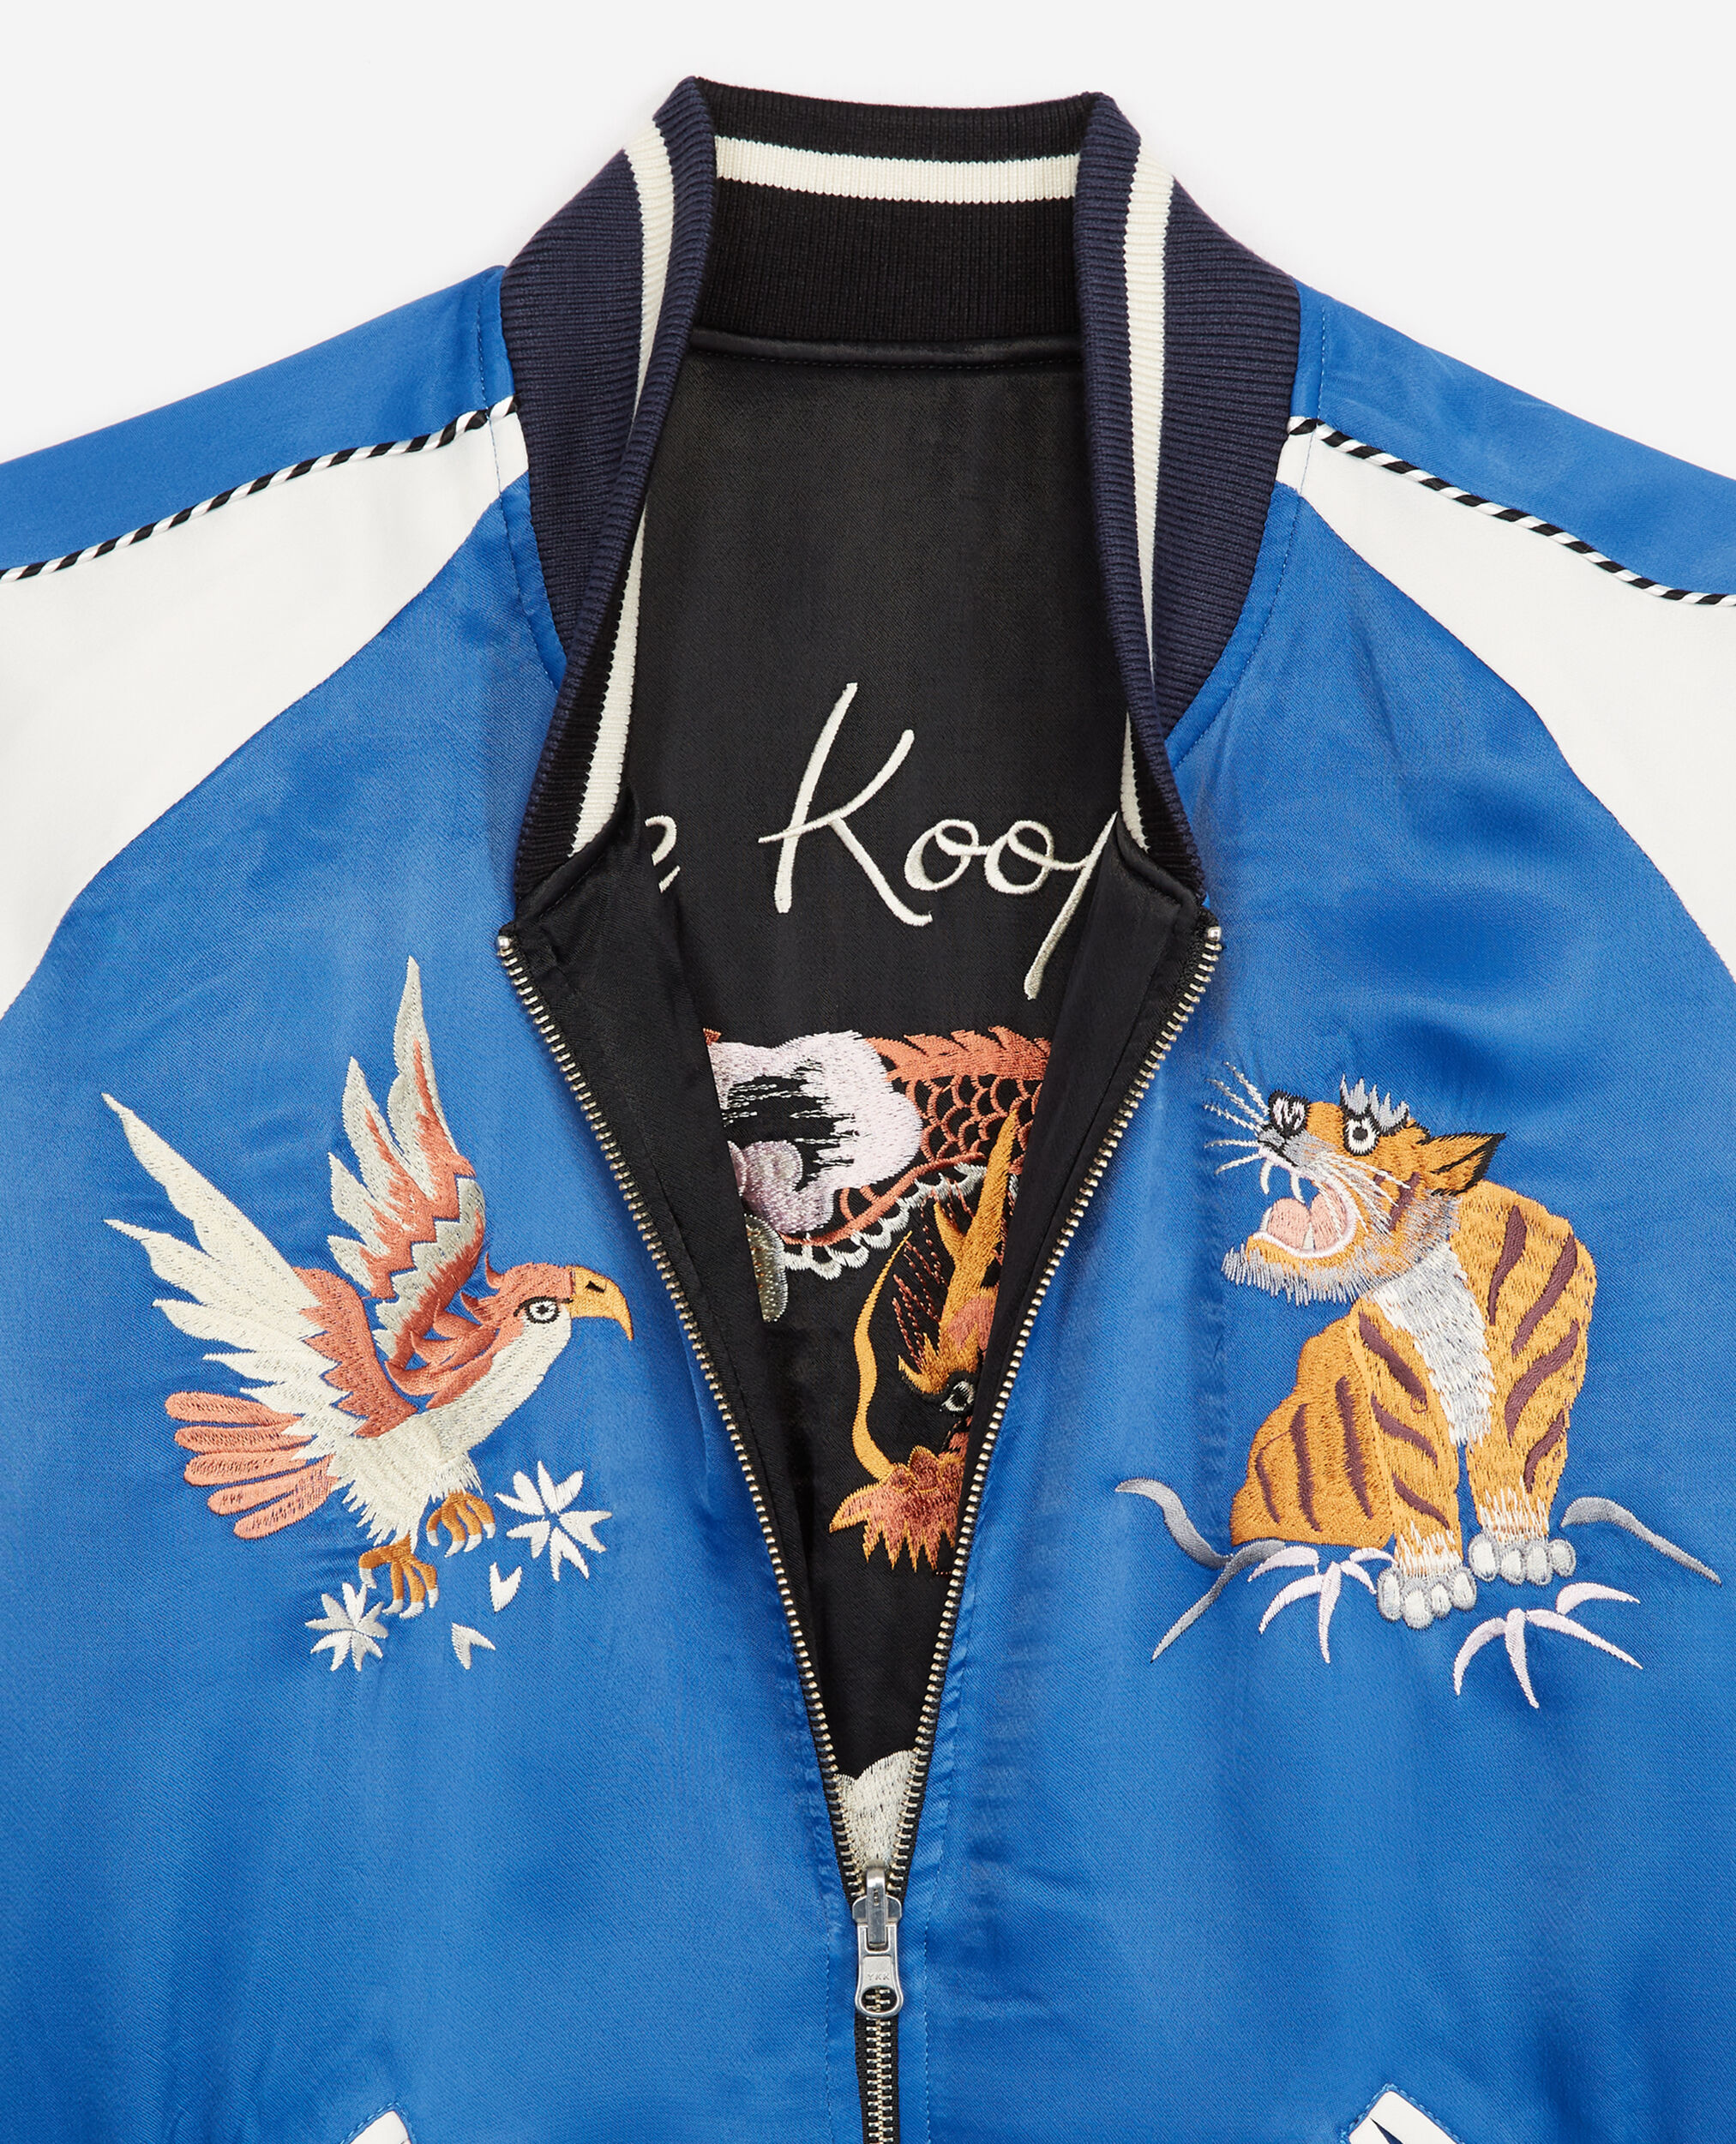 Reversible blue satin jacket with embroidery, BLUE WHITE, hi-res image number null